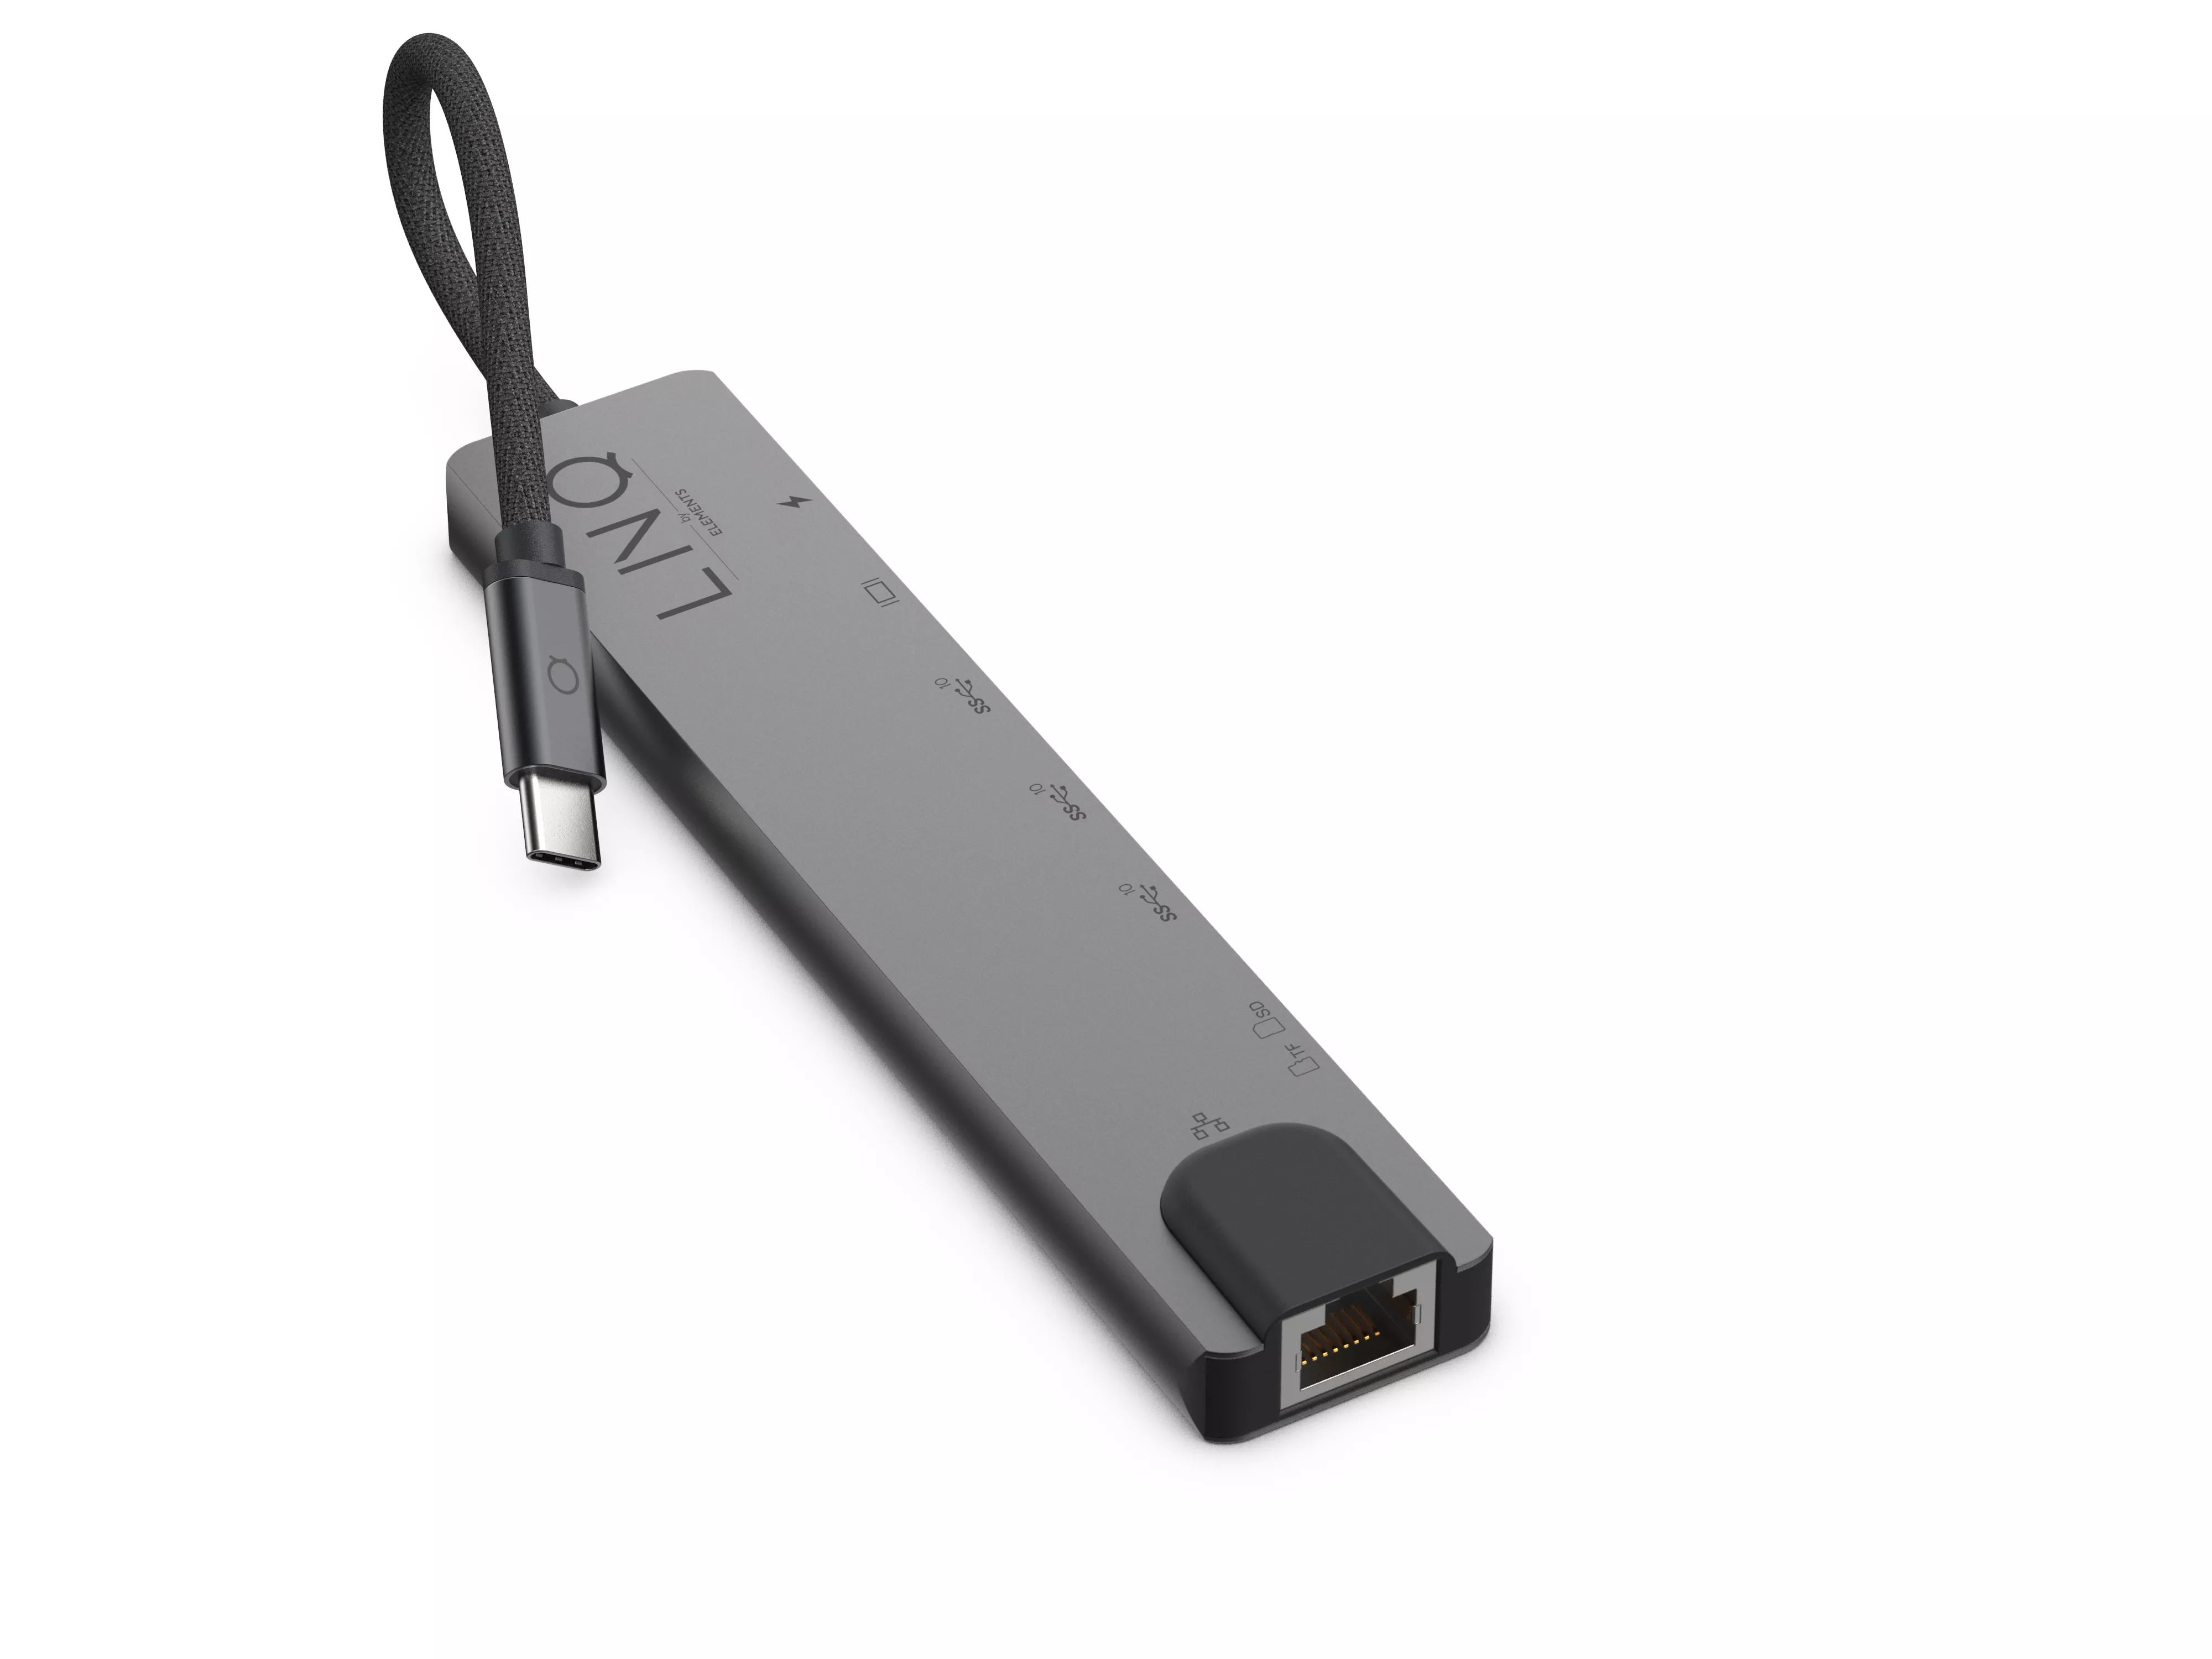 Achat LINQ byELEMENTS 8in1 Pro USB-C 10Gbps Multiport Hub sur hello RSE - visuel 3